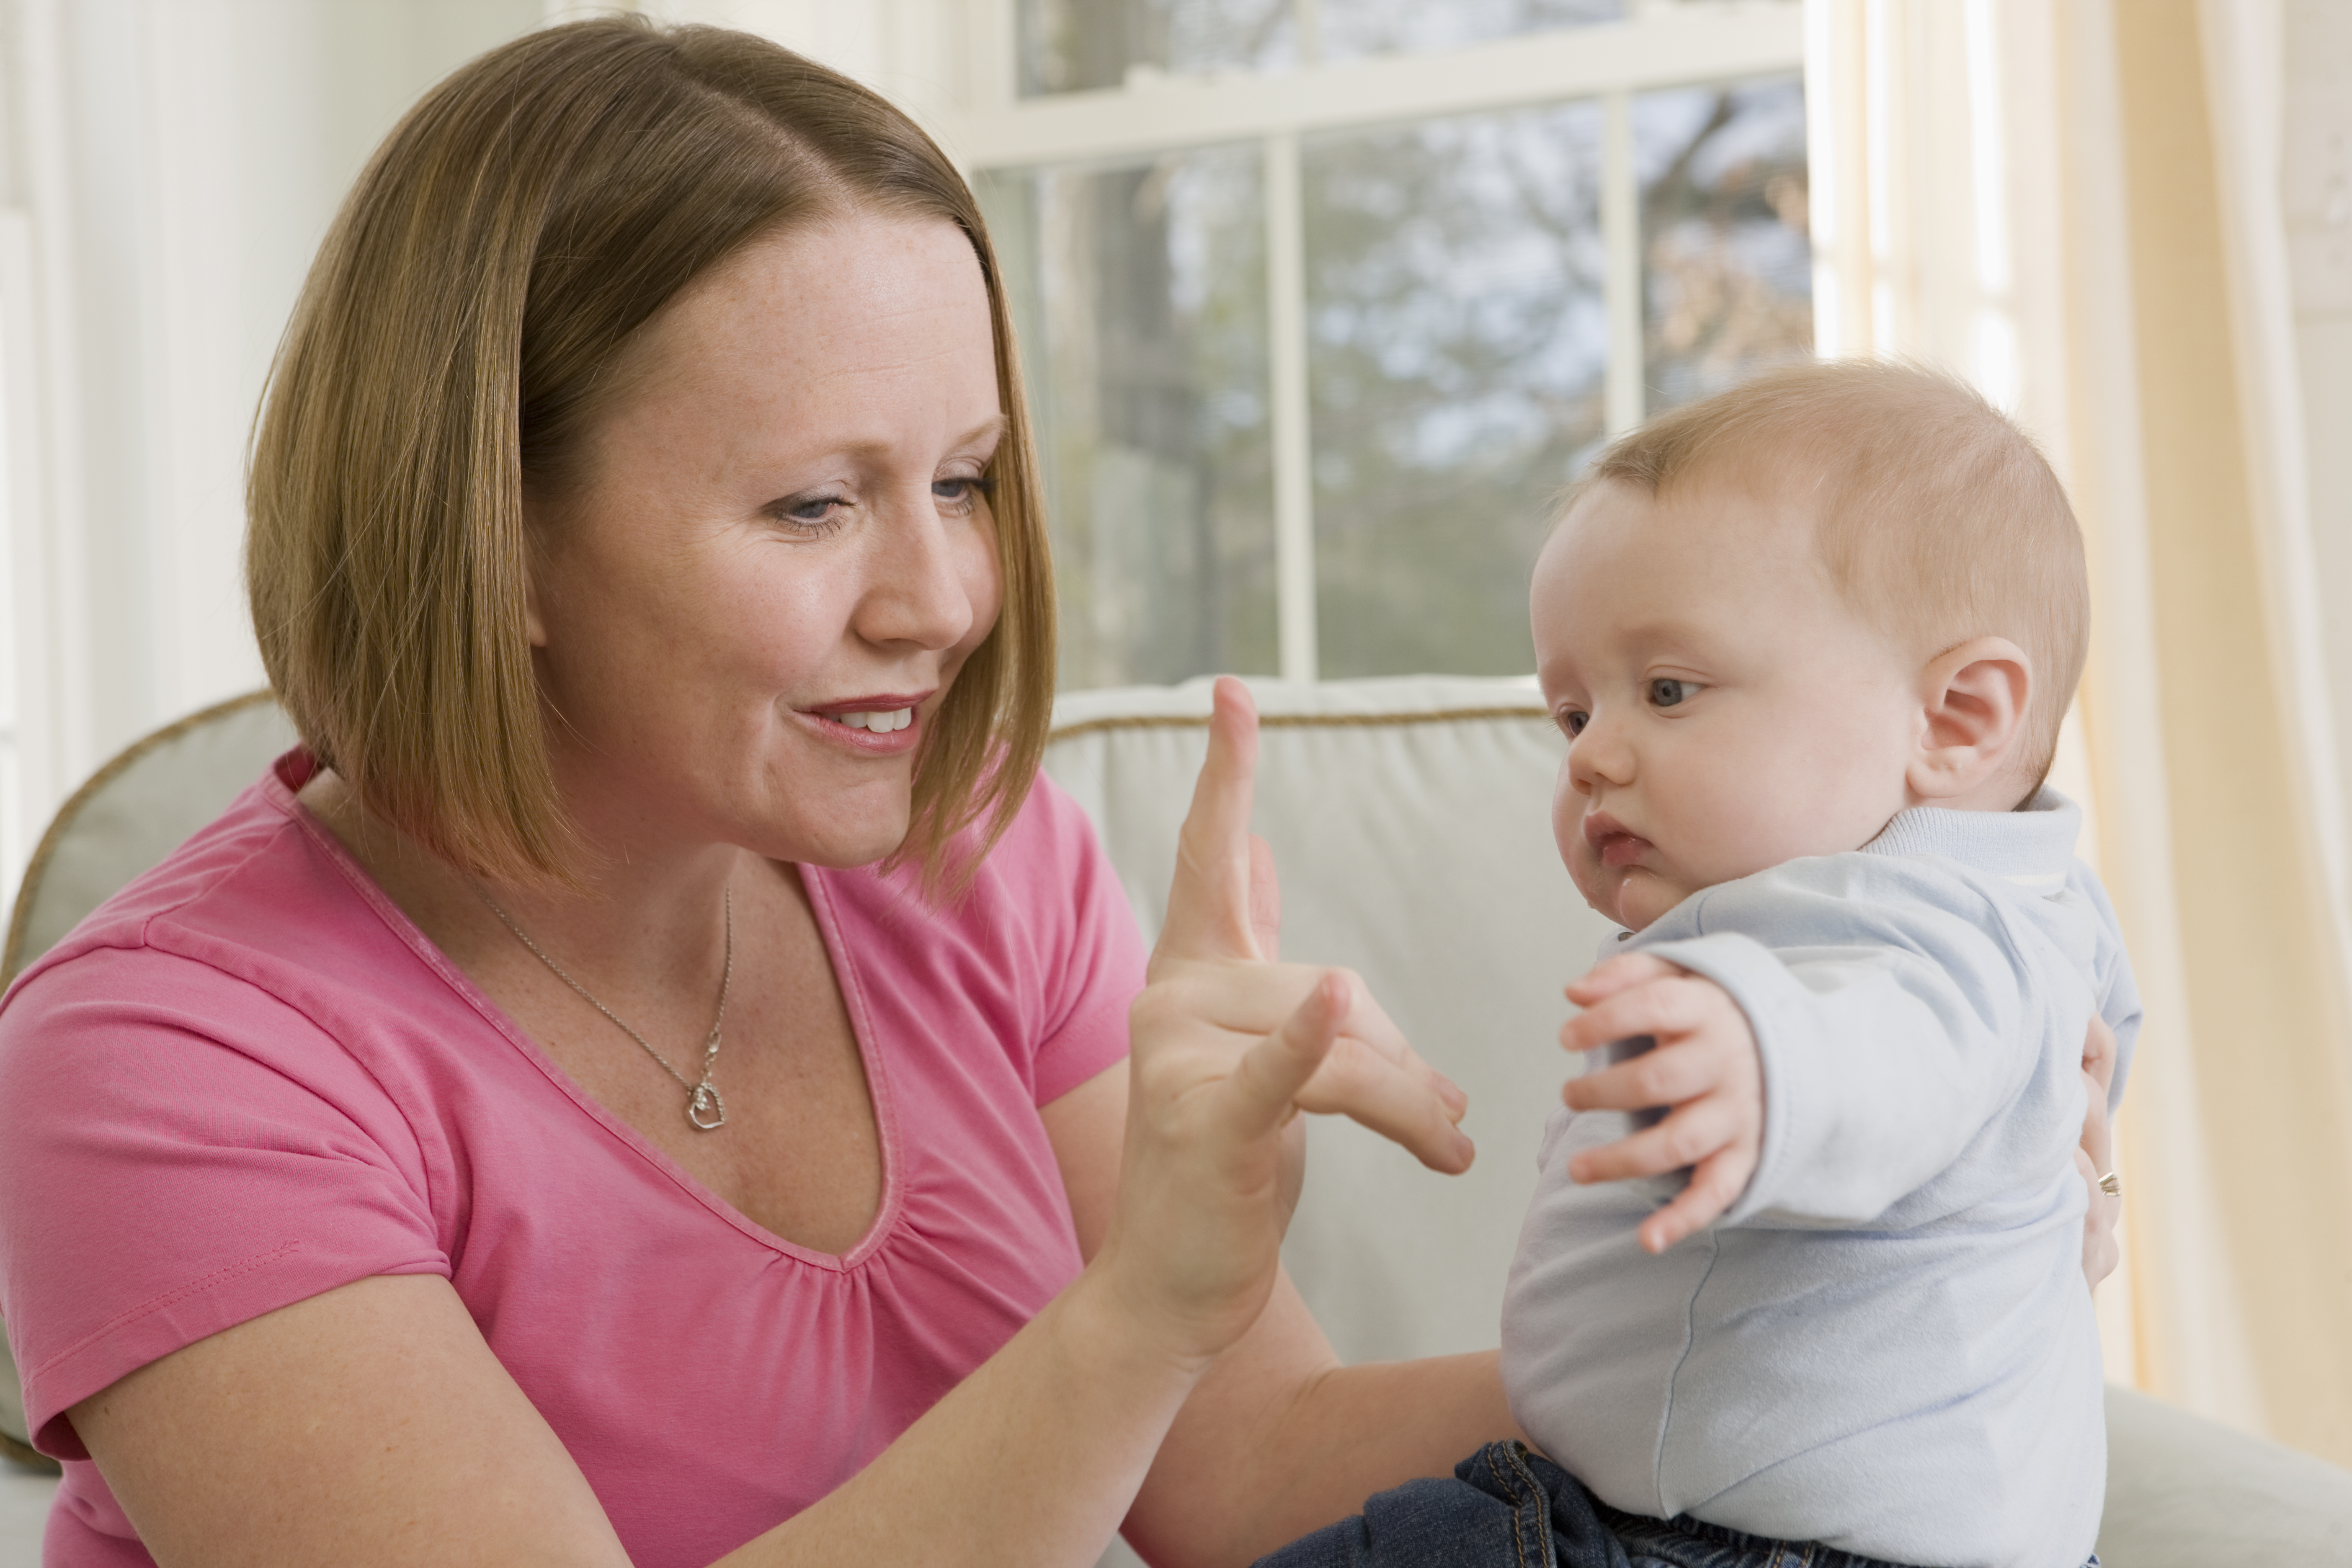 Woman signing the phrase "I love you" to baby in American Sign language